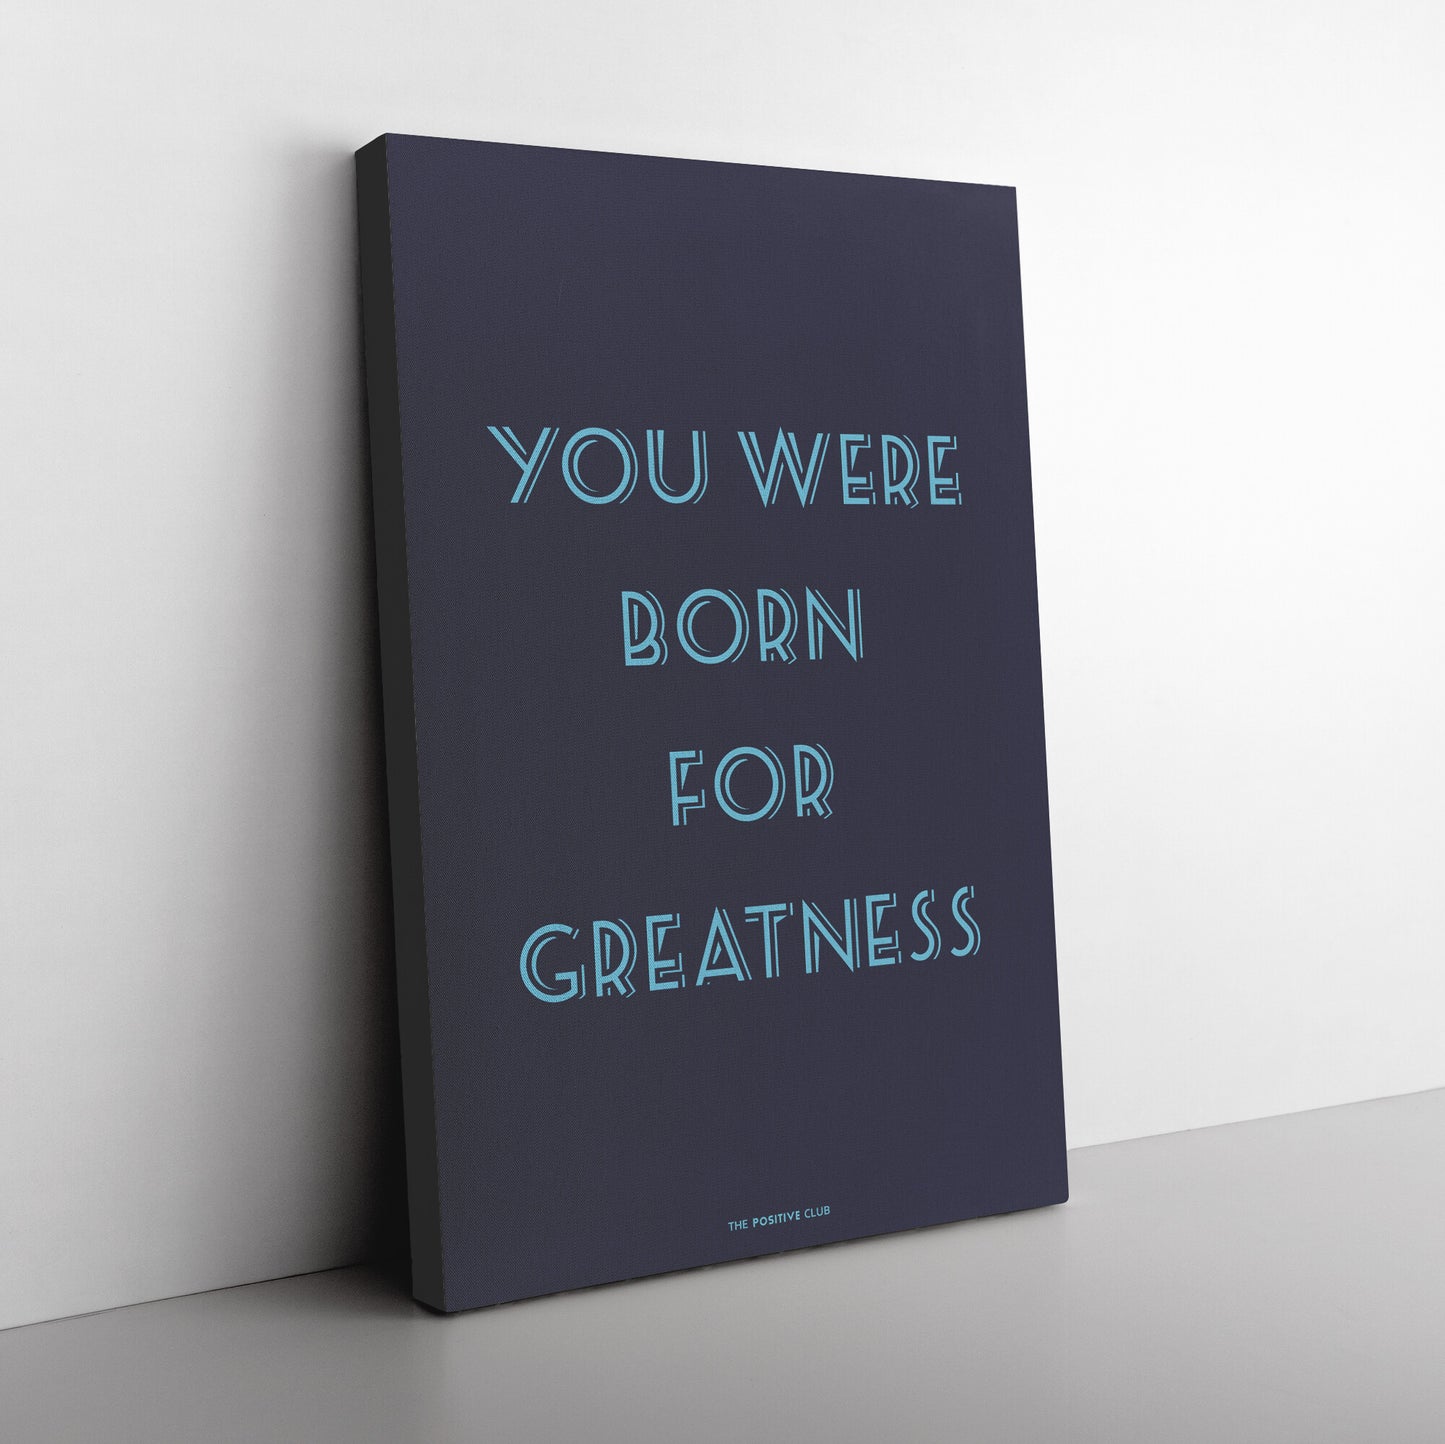 YOU WERE BORN FOR GREATNESS